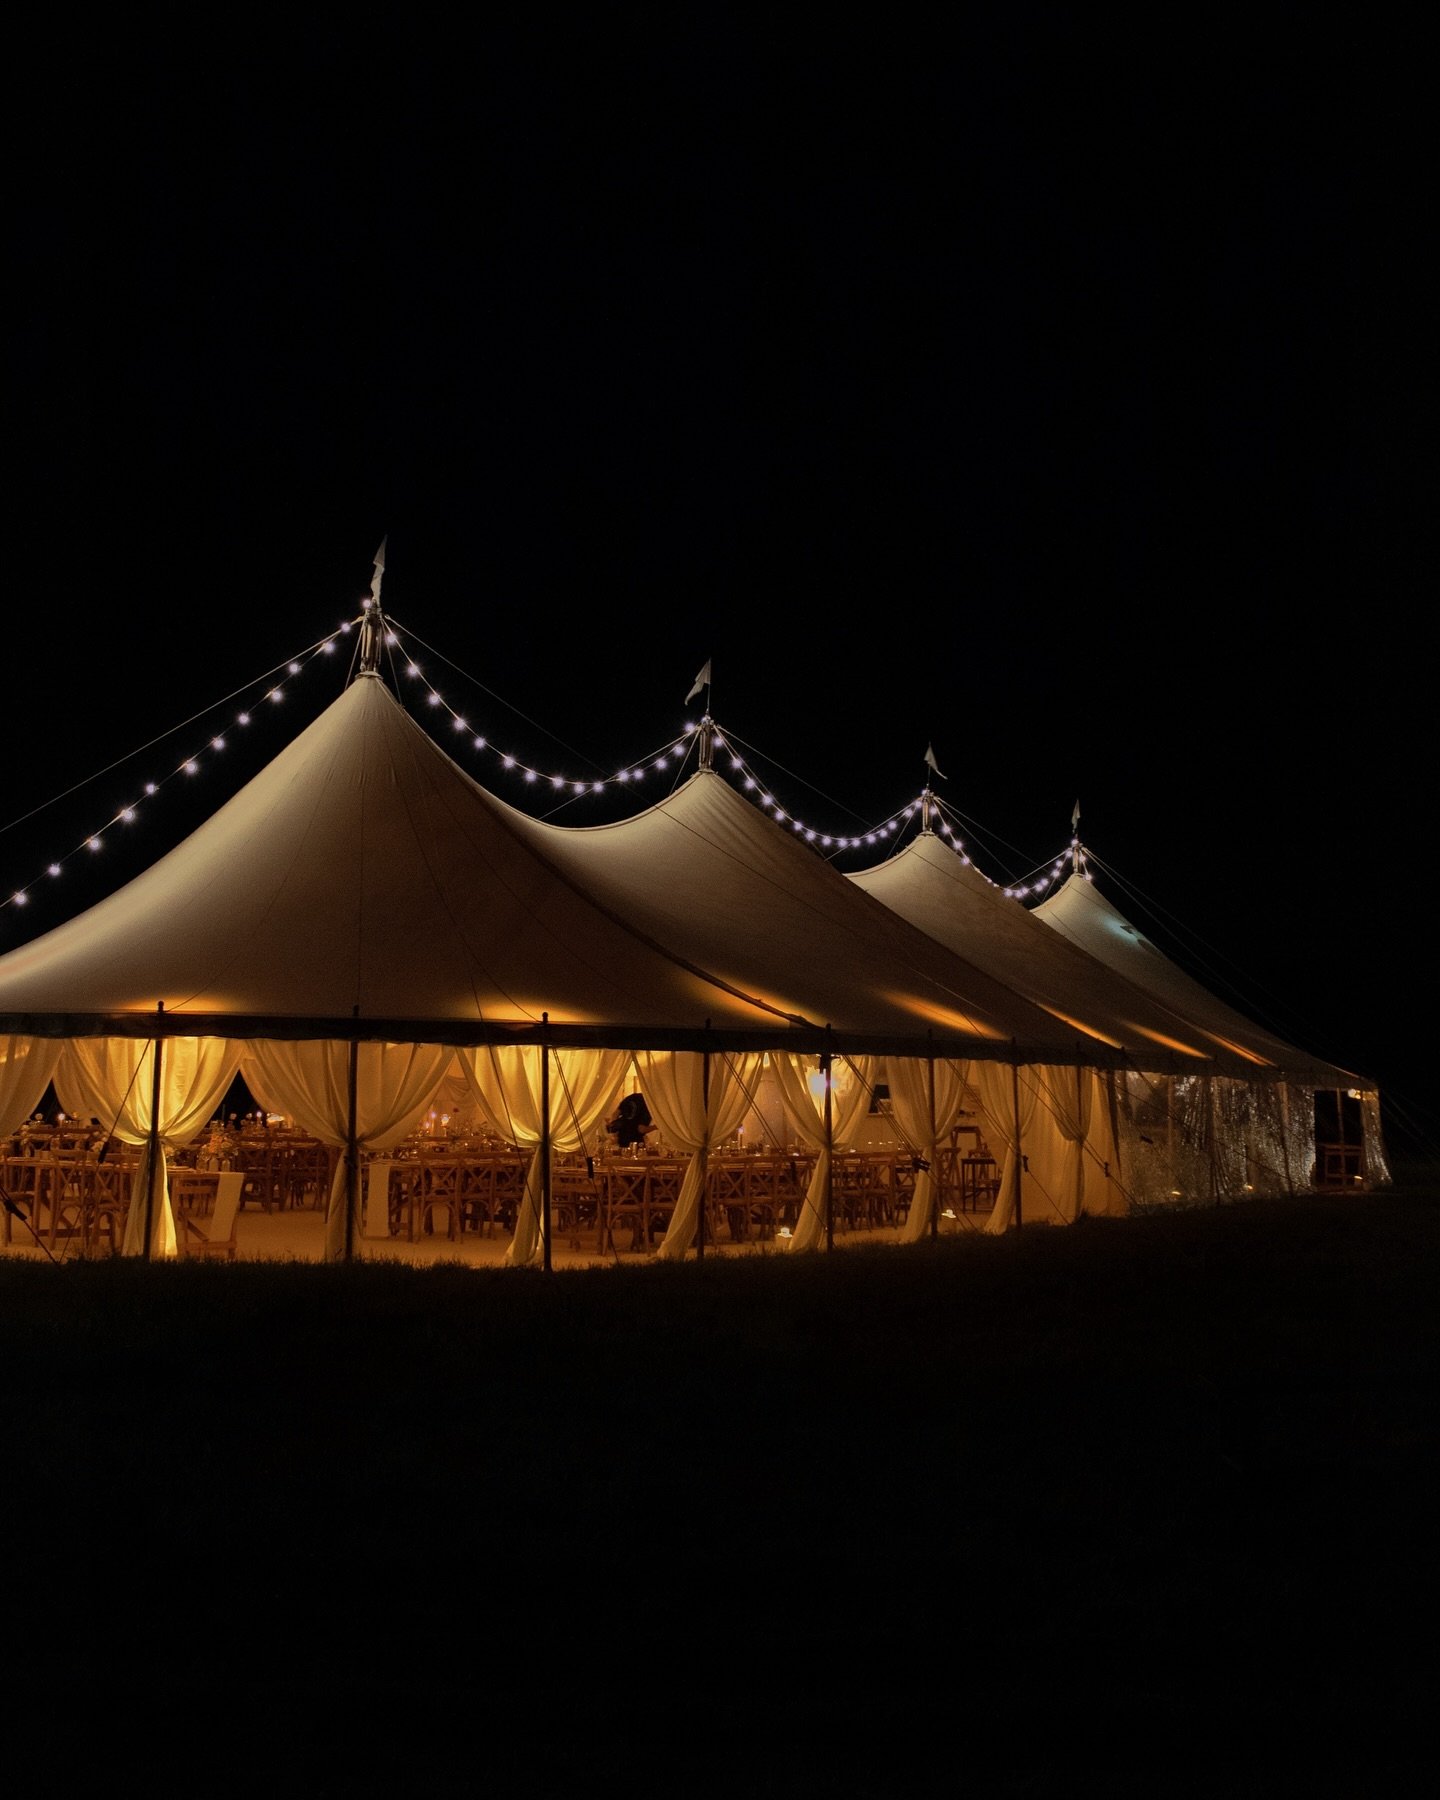 Our magnificent 12m x 34m marquee lighting up the night at @coddingtonmill_lakehouse last weekend ✨

#thecanvastentco #coddingtonmilllakehouse #itsawills #cheshireweddingvenues #cheshireweddingsuppliers #cheshirewedding #marqueehire #marqueewedding #